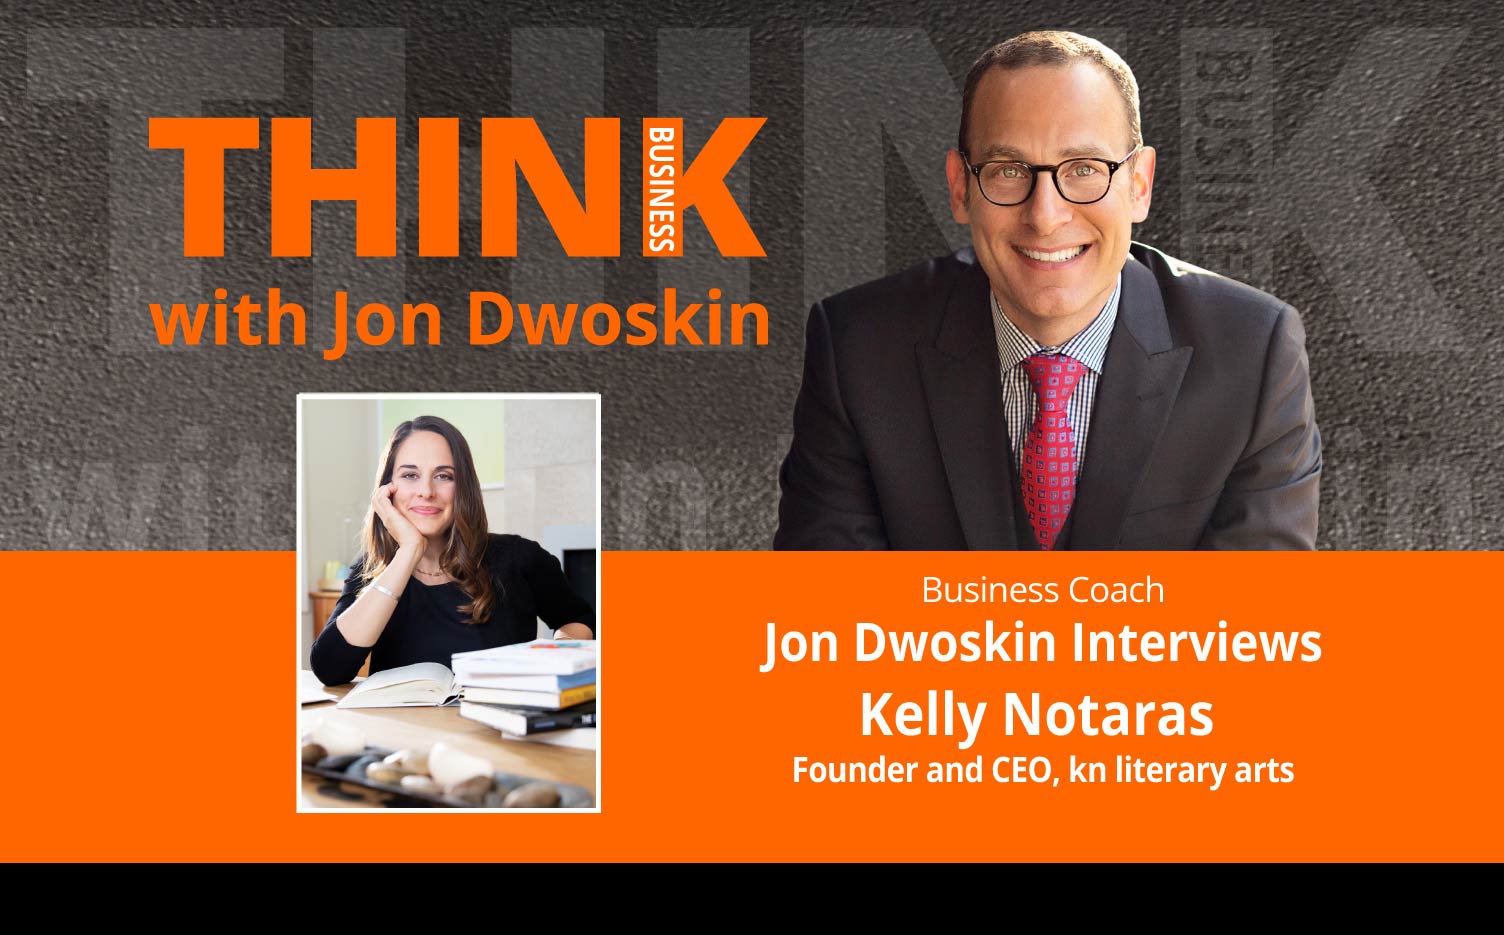 THINK Business Podcast: Jon Dwoskin Interviews Kelly Notaras, Founder and CEO, kn literary arts